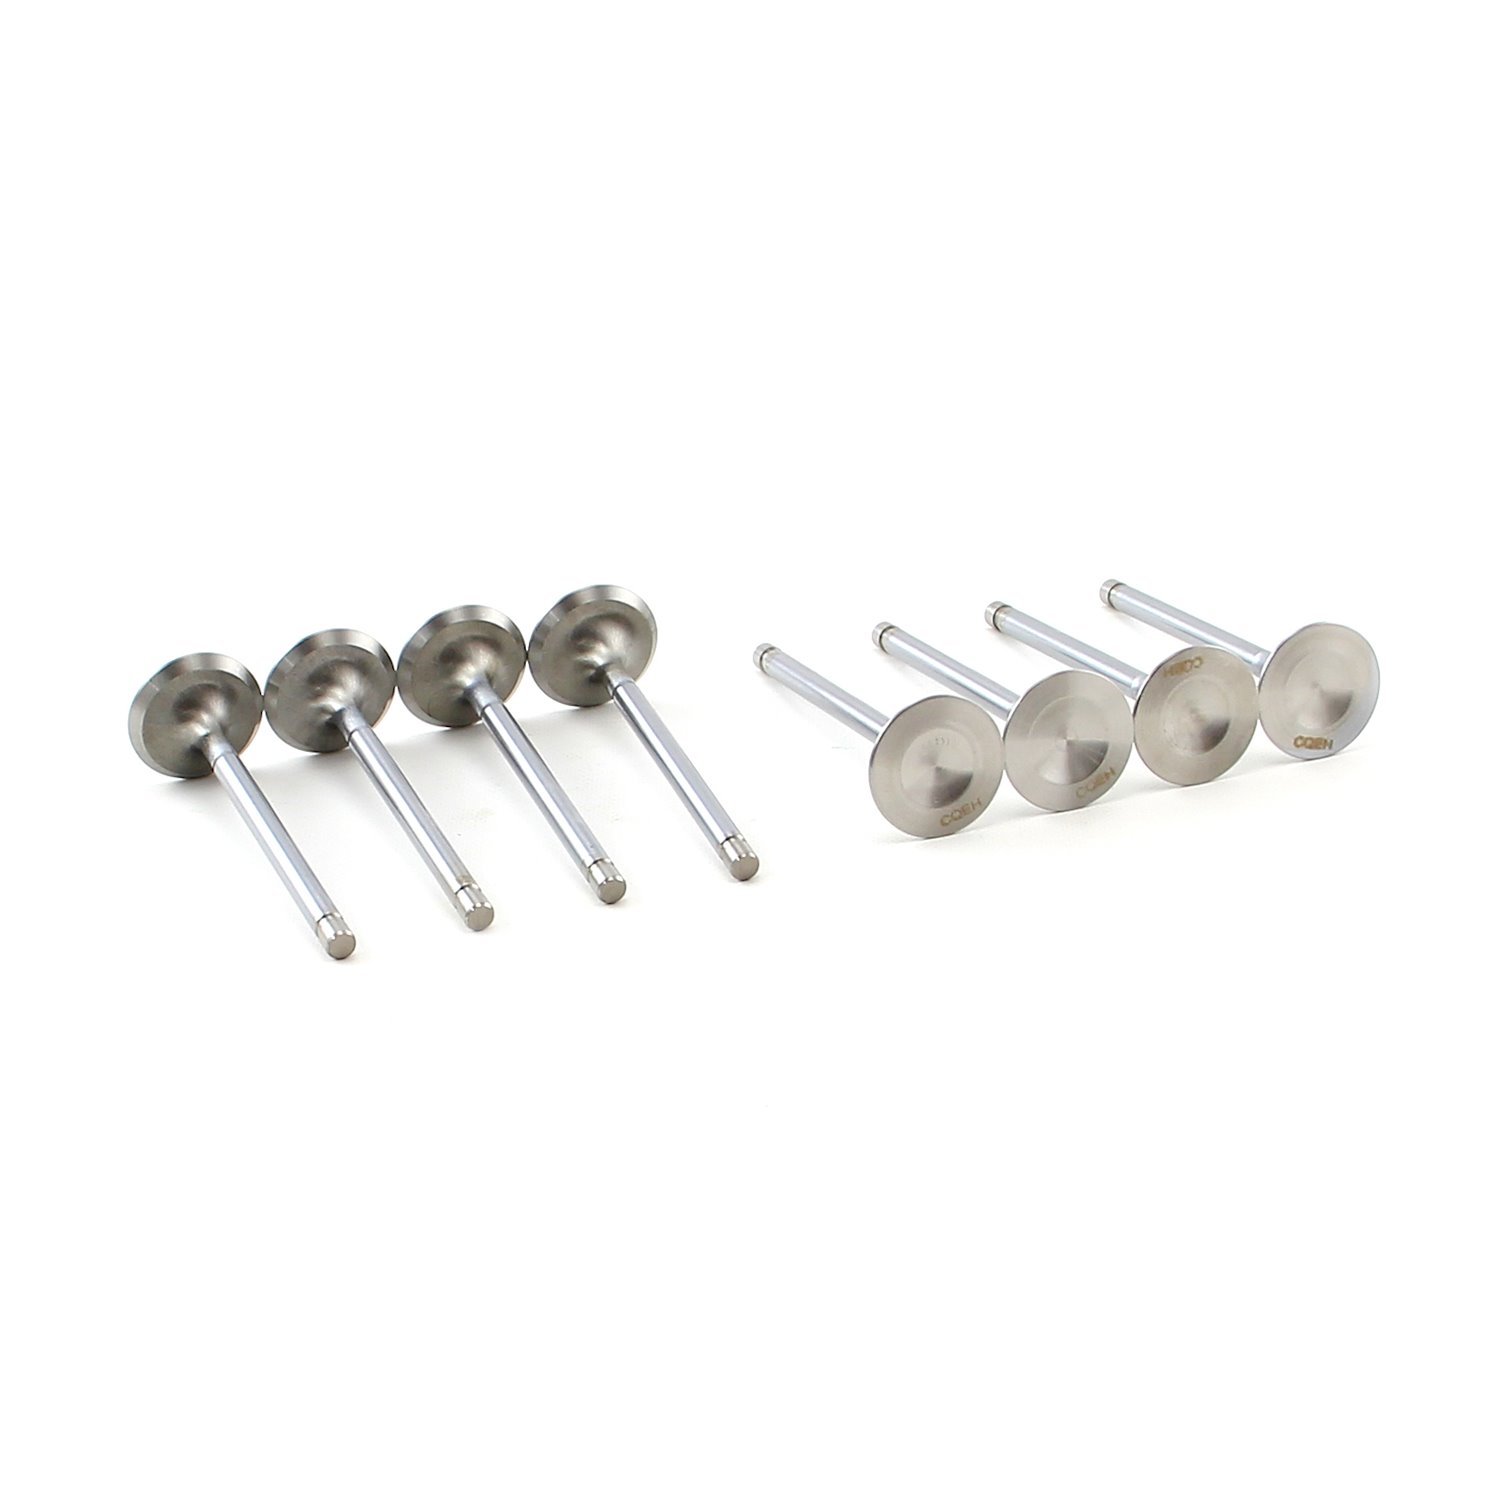 Stainless Steel Exhaust Valves Ford 302/351W, 1.600 in. Head Diameter